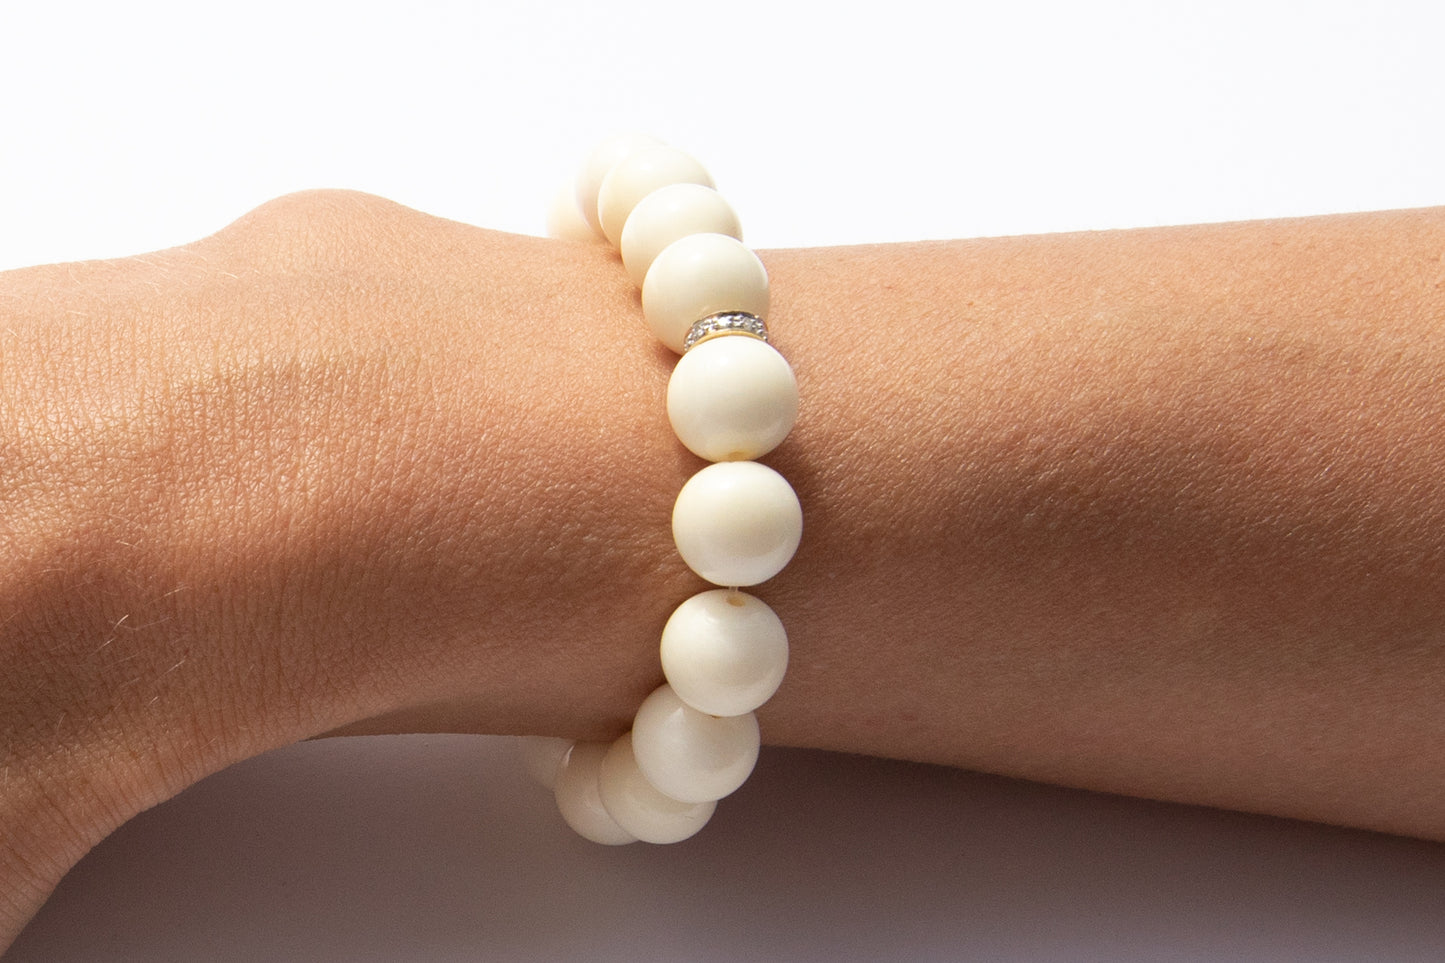 White Bone Beaded Bracelet With Pavé Champagne Diamonds in Oxidized Silver Featured on Arm